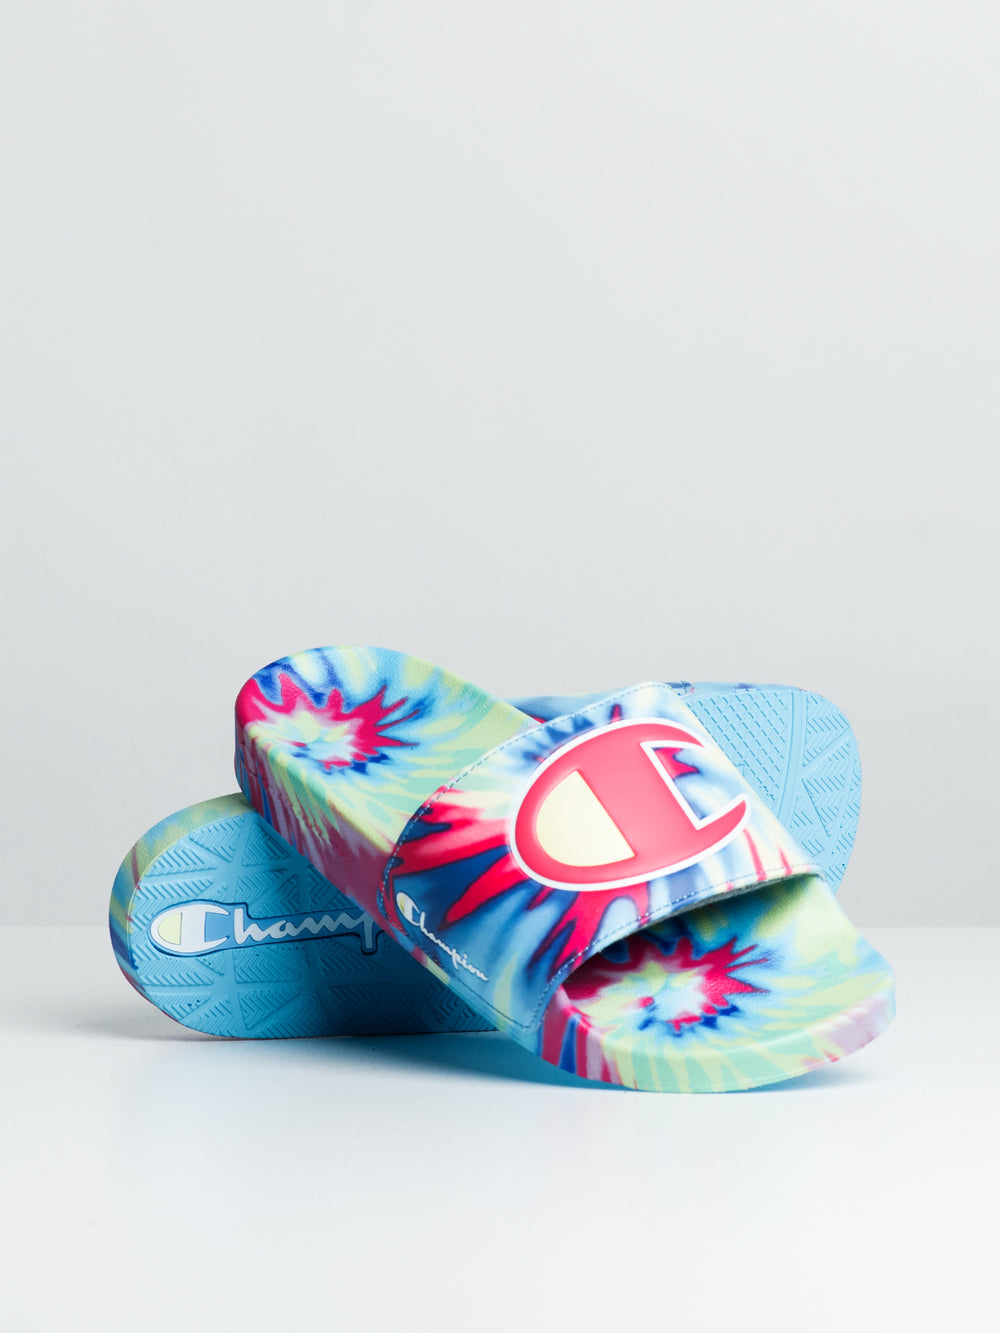 WOMENS CHAMPION IPO TIE DYE SLIDES - CLEARANCE